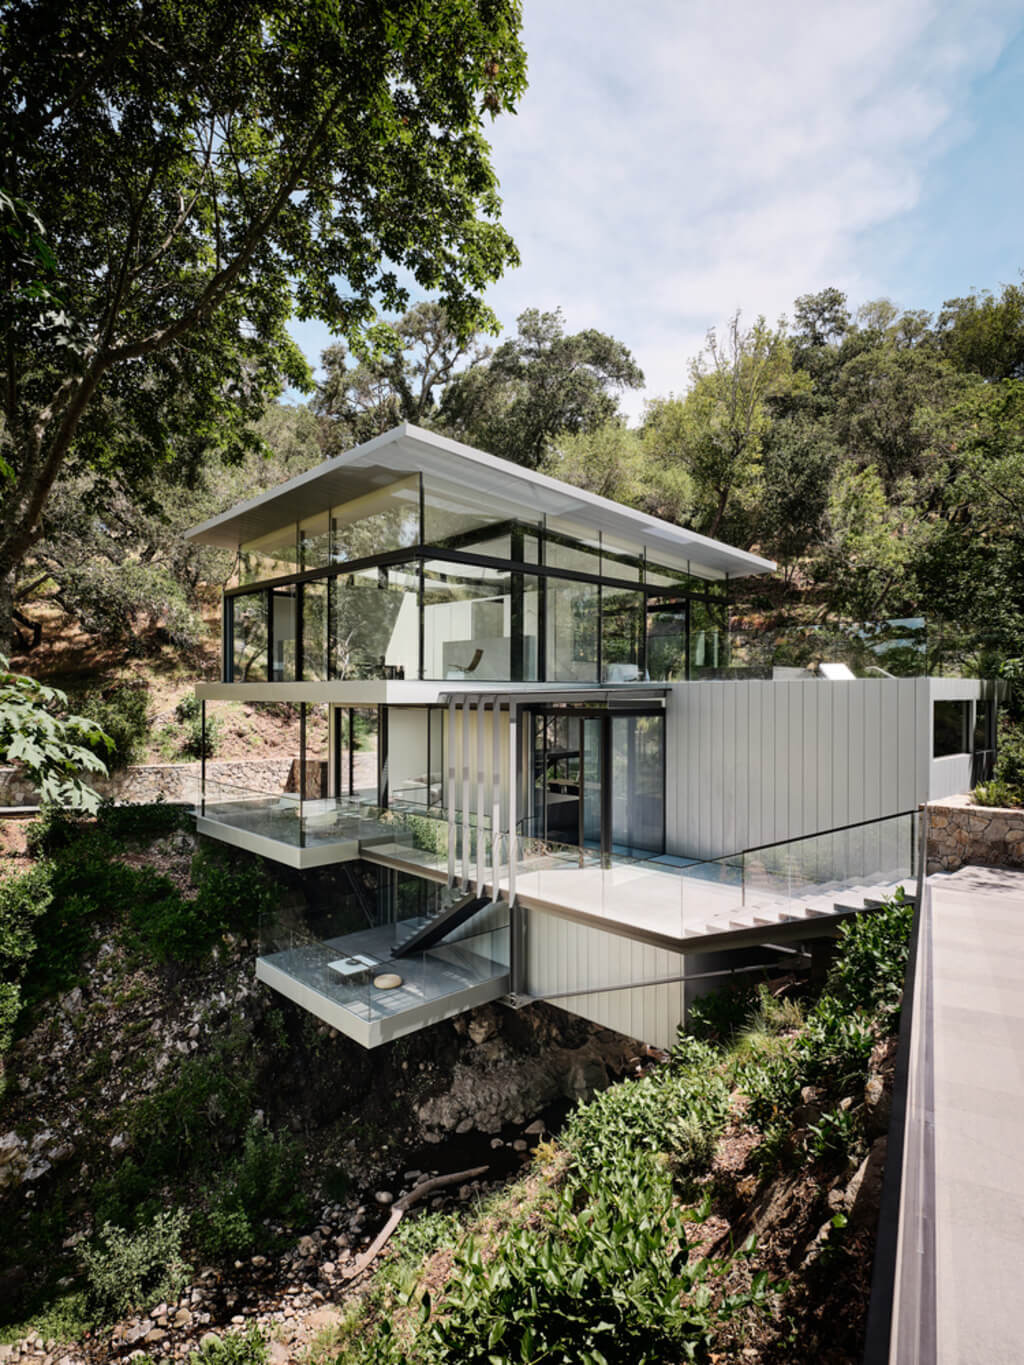 Suspension House on a hillside with trees in the background